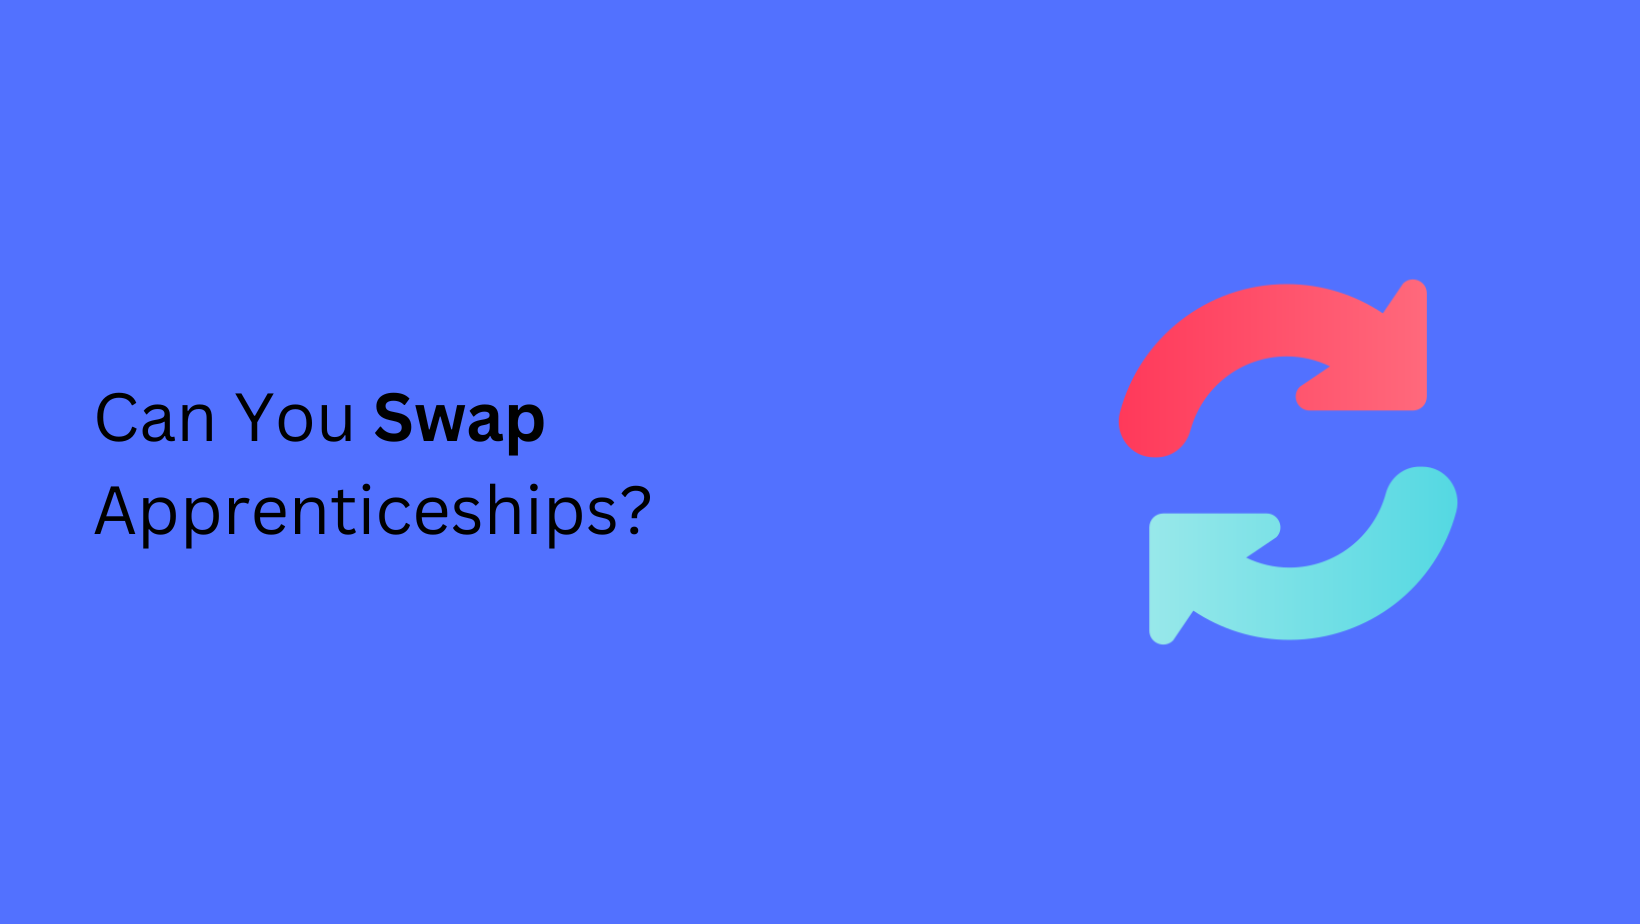 Can You Swap Apprenticeships